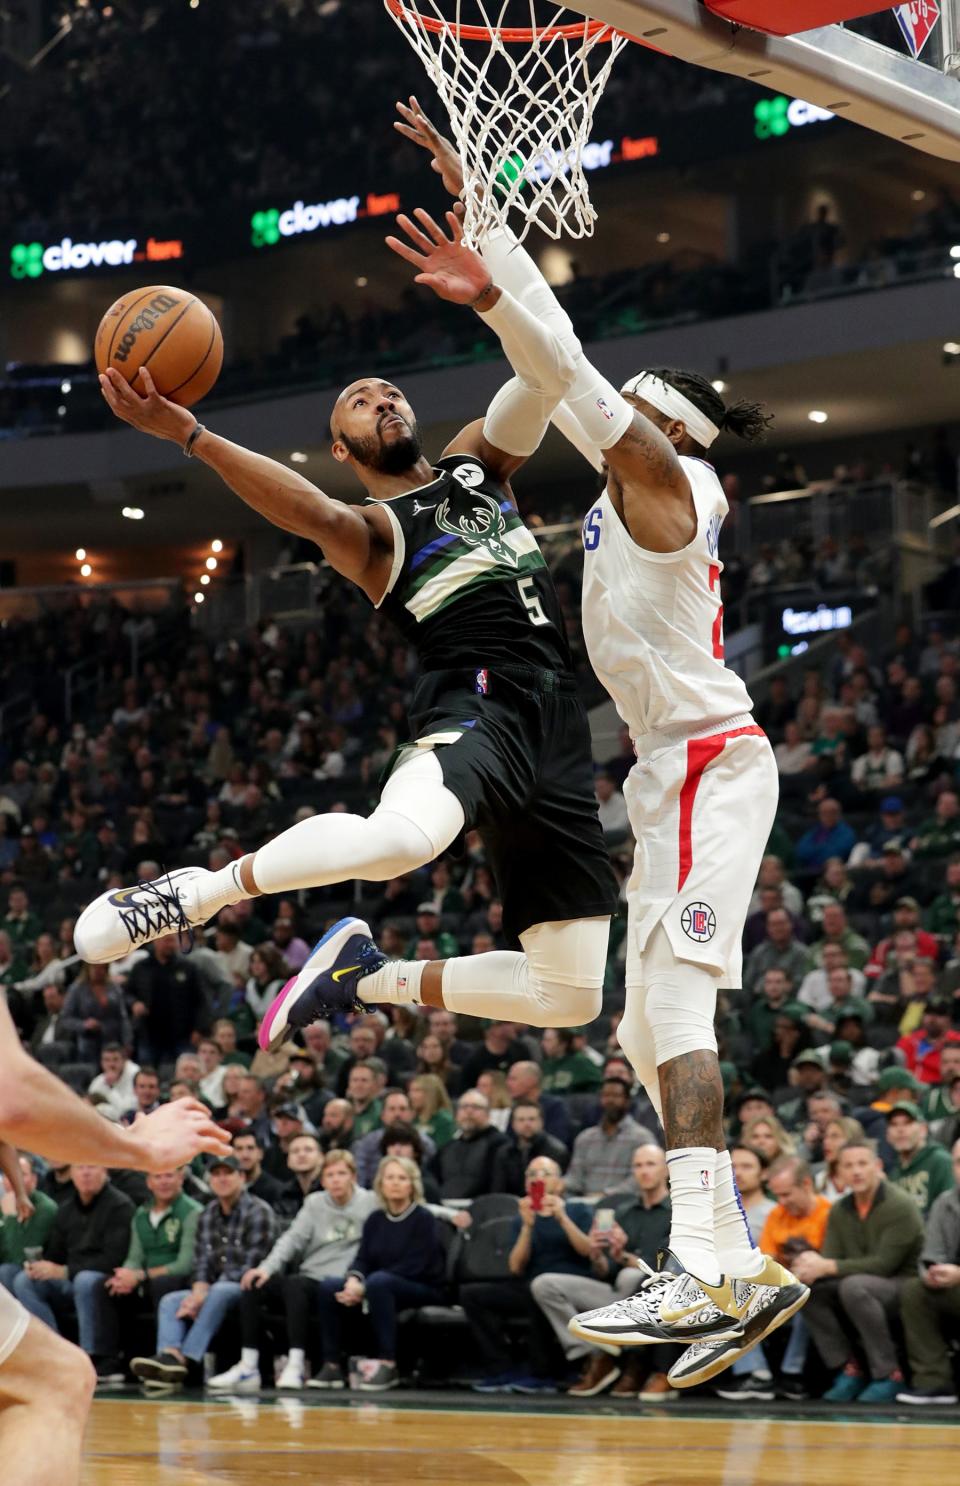 Jevon Carter worked on his game all offseason and impressed enough in training camp to earn a starting role for the Milwaukee Bucks at the start of the year.